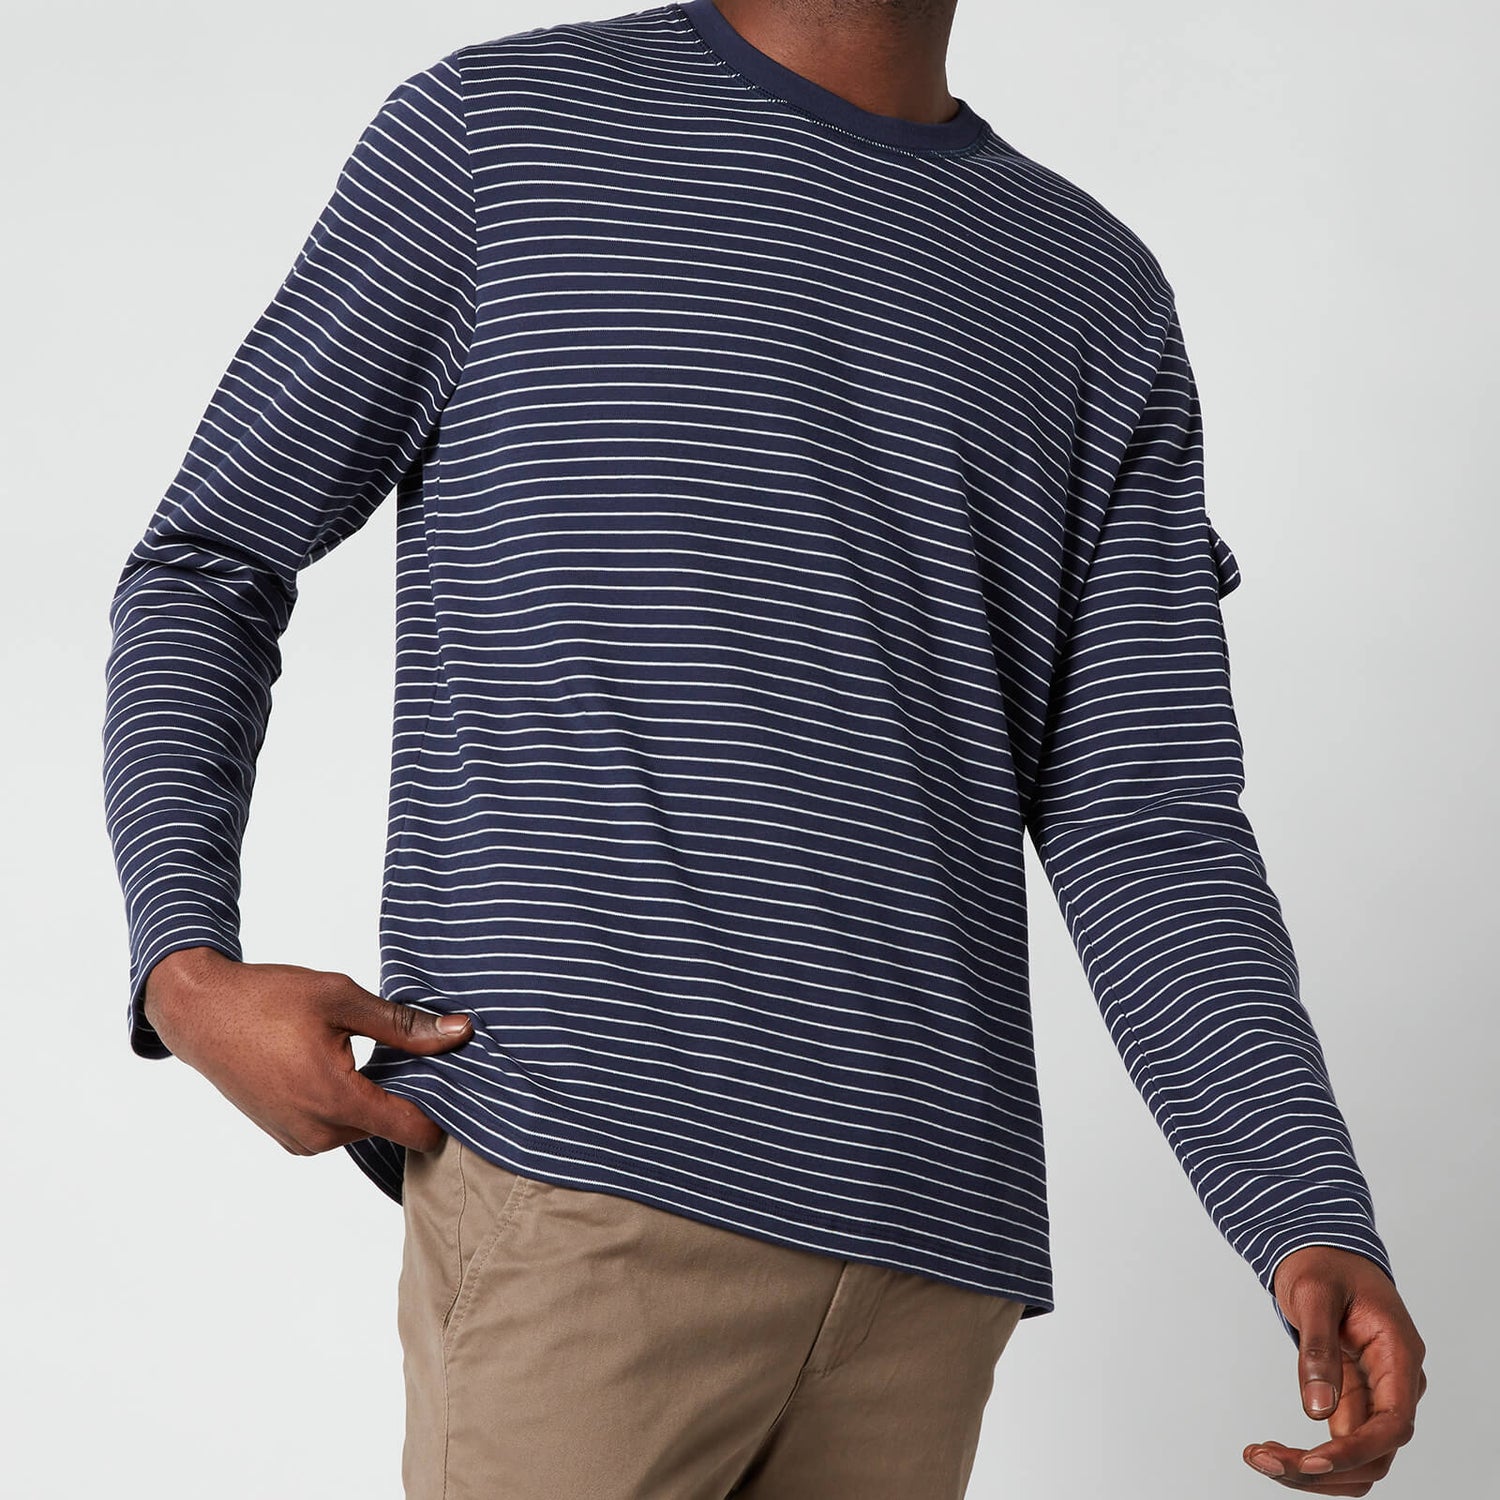 Ted Baker Men's Melted Striped Long Sleeve Top - Navy